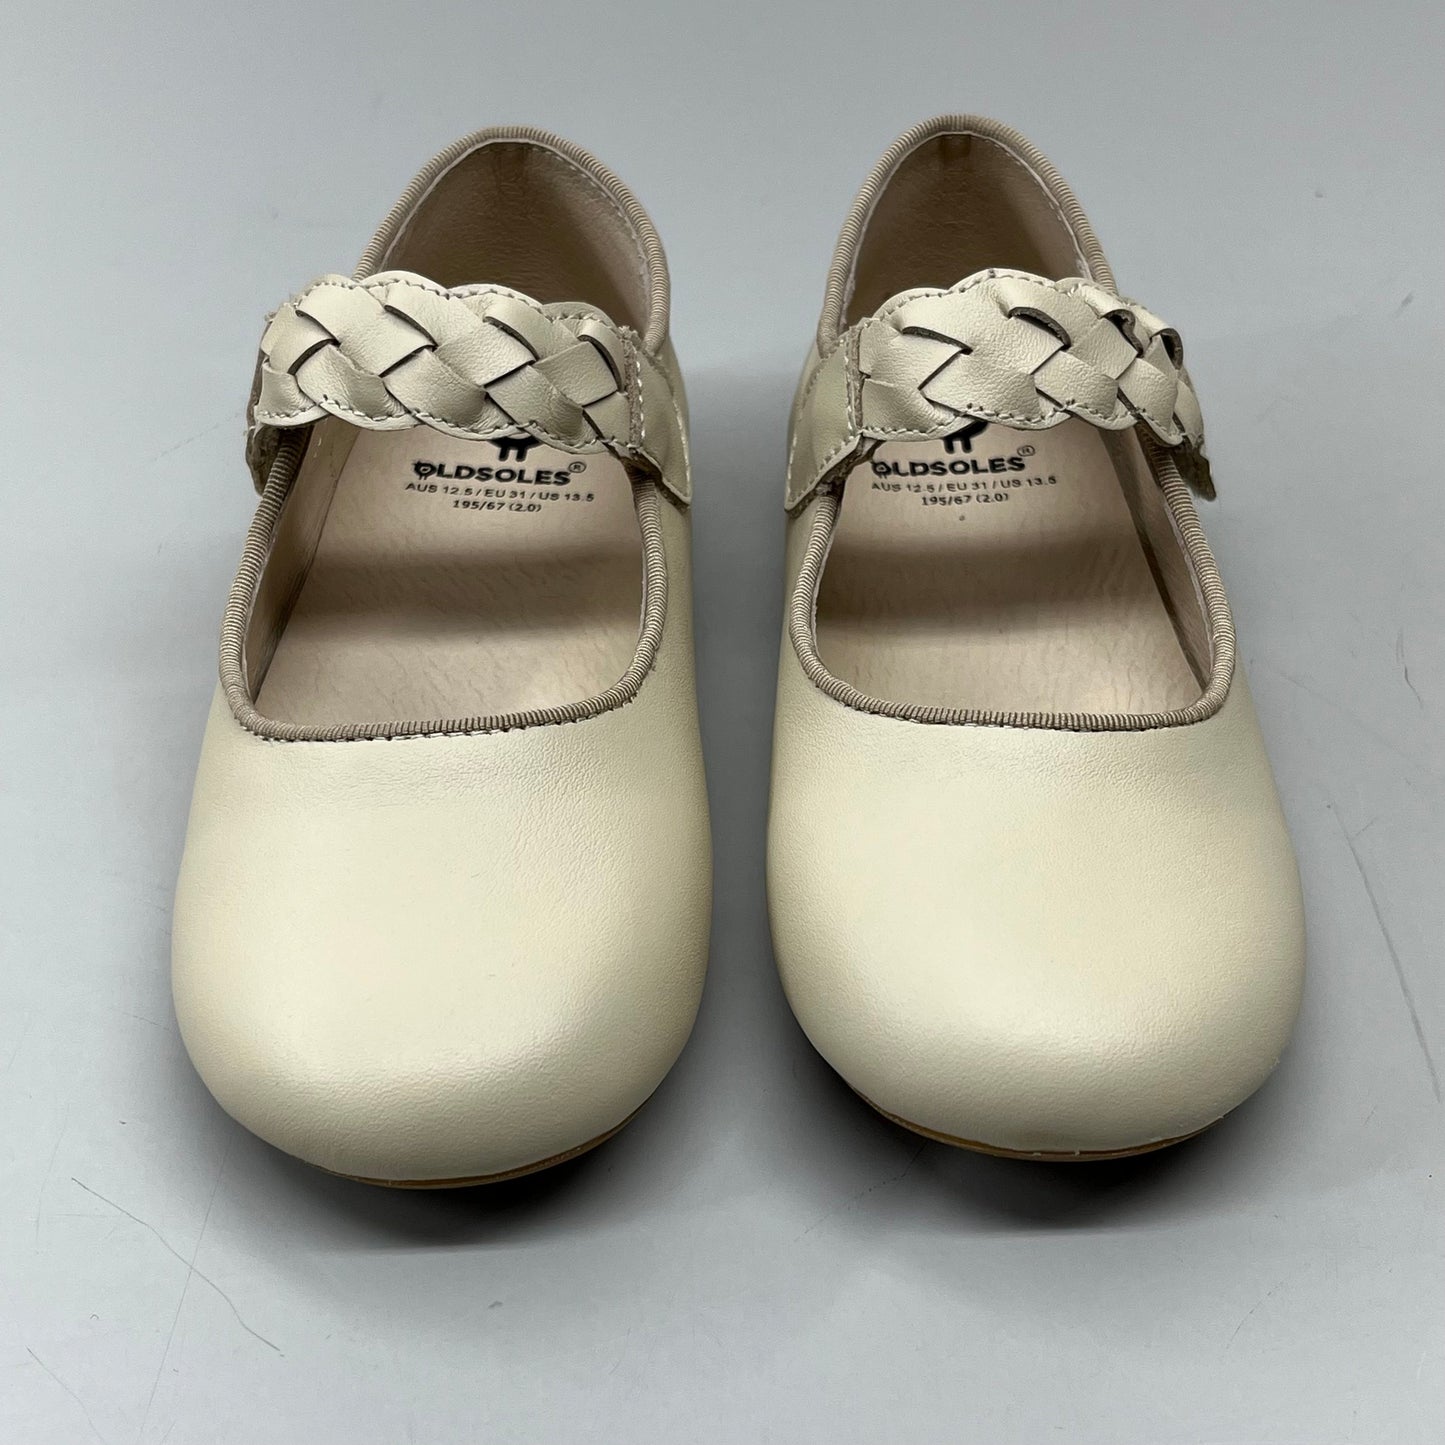 OLD SOLES Lady Plat Braided Strap Leather Shoe Kid’s Sz 23 US 7 Cream #817